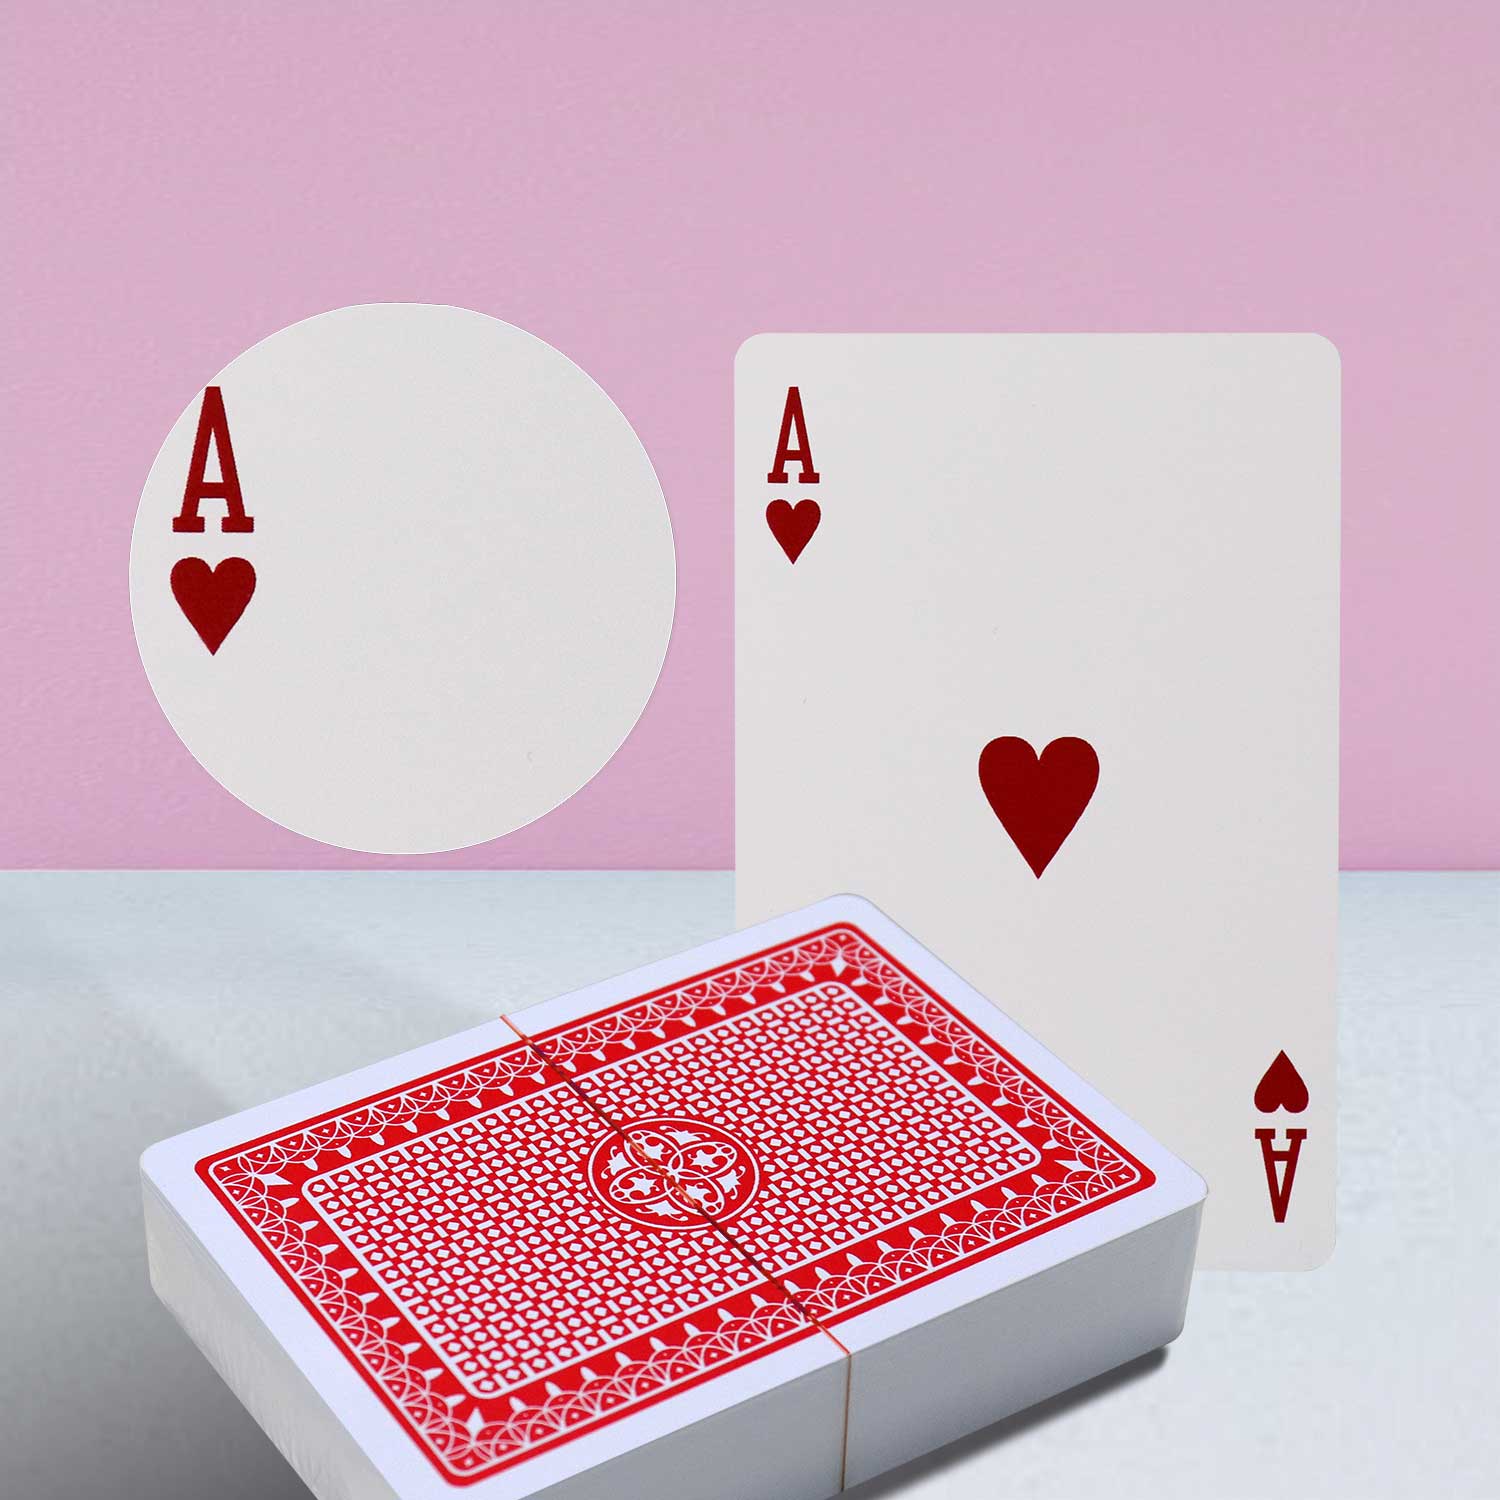 Royal Plastic Playing Cards Standard Index/single deck